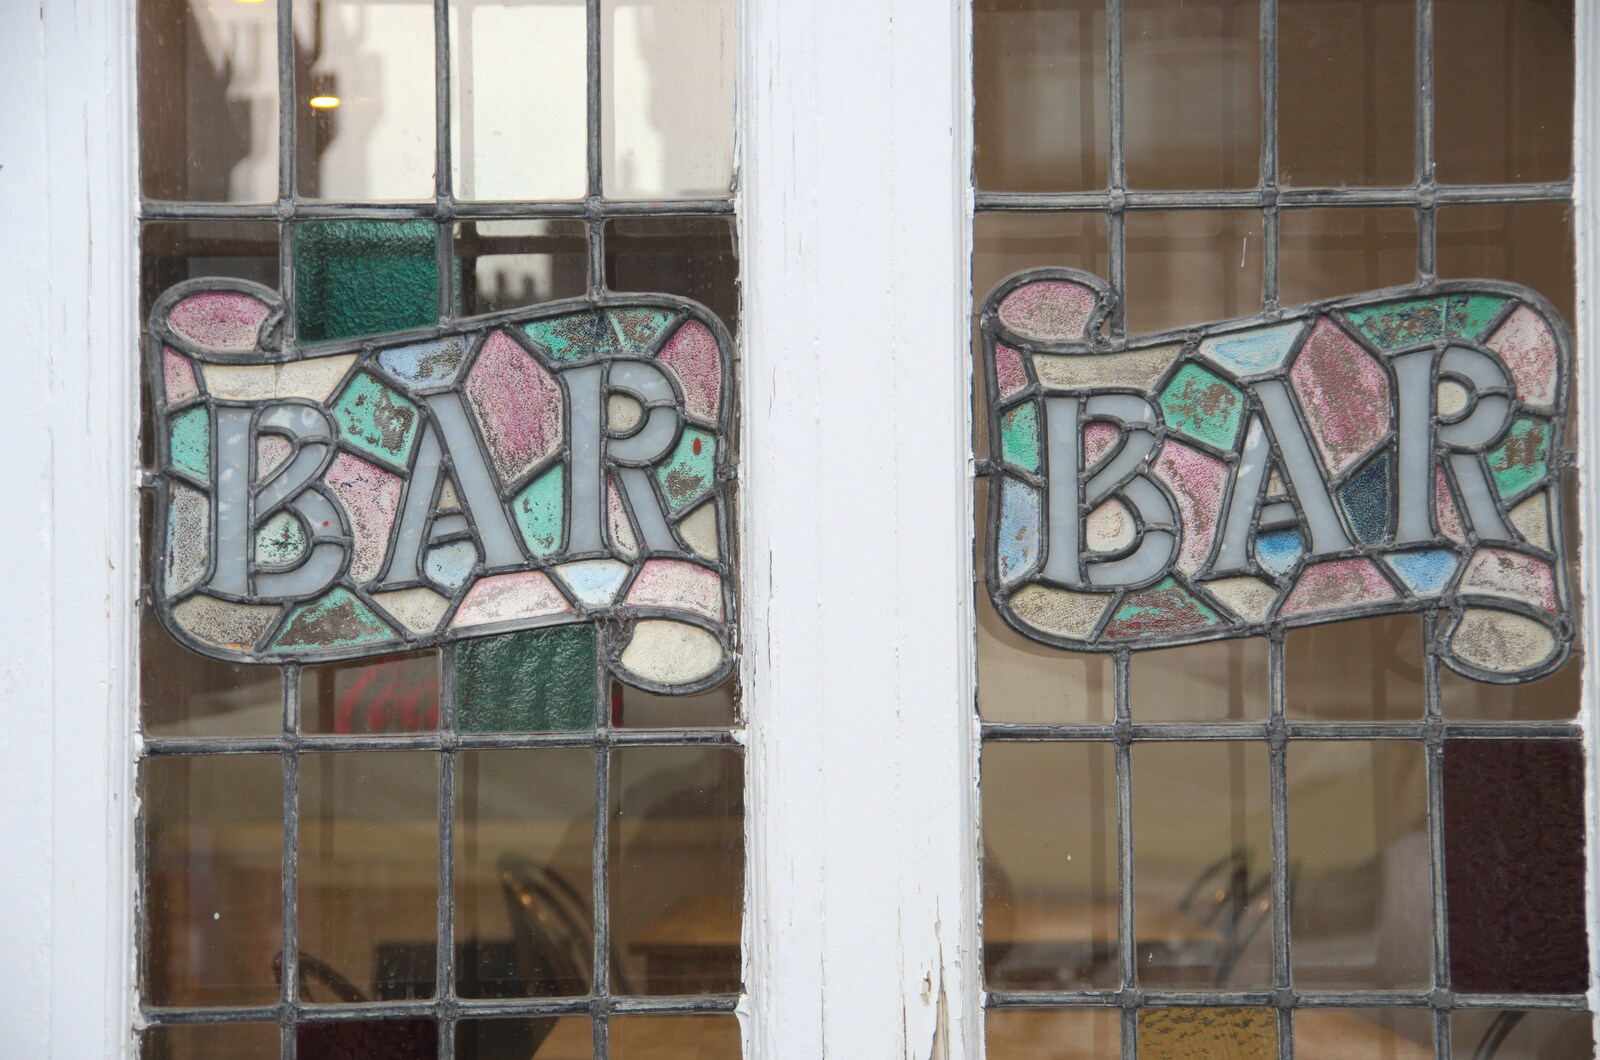 Bar - in stained glass from Camping on the Coast, East Runton, North Norfolk - 25th July 2020